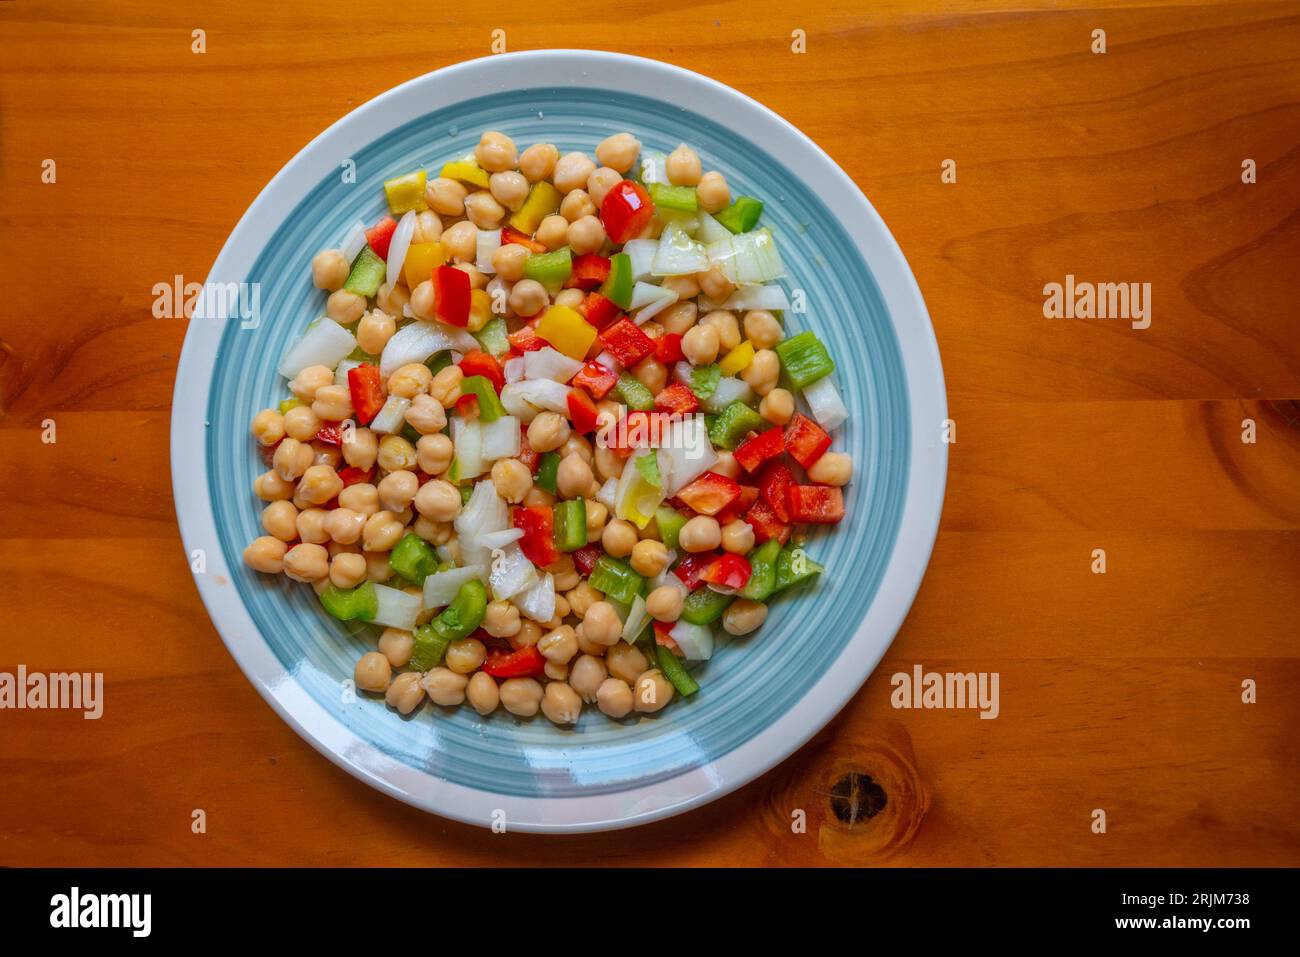 Salad made of chickpeas, pepper, onion and olive oil. Stock Photo